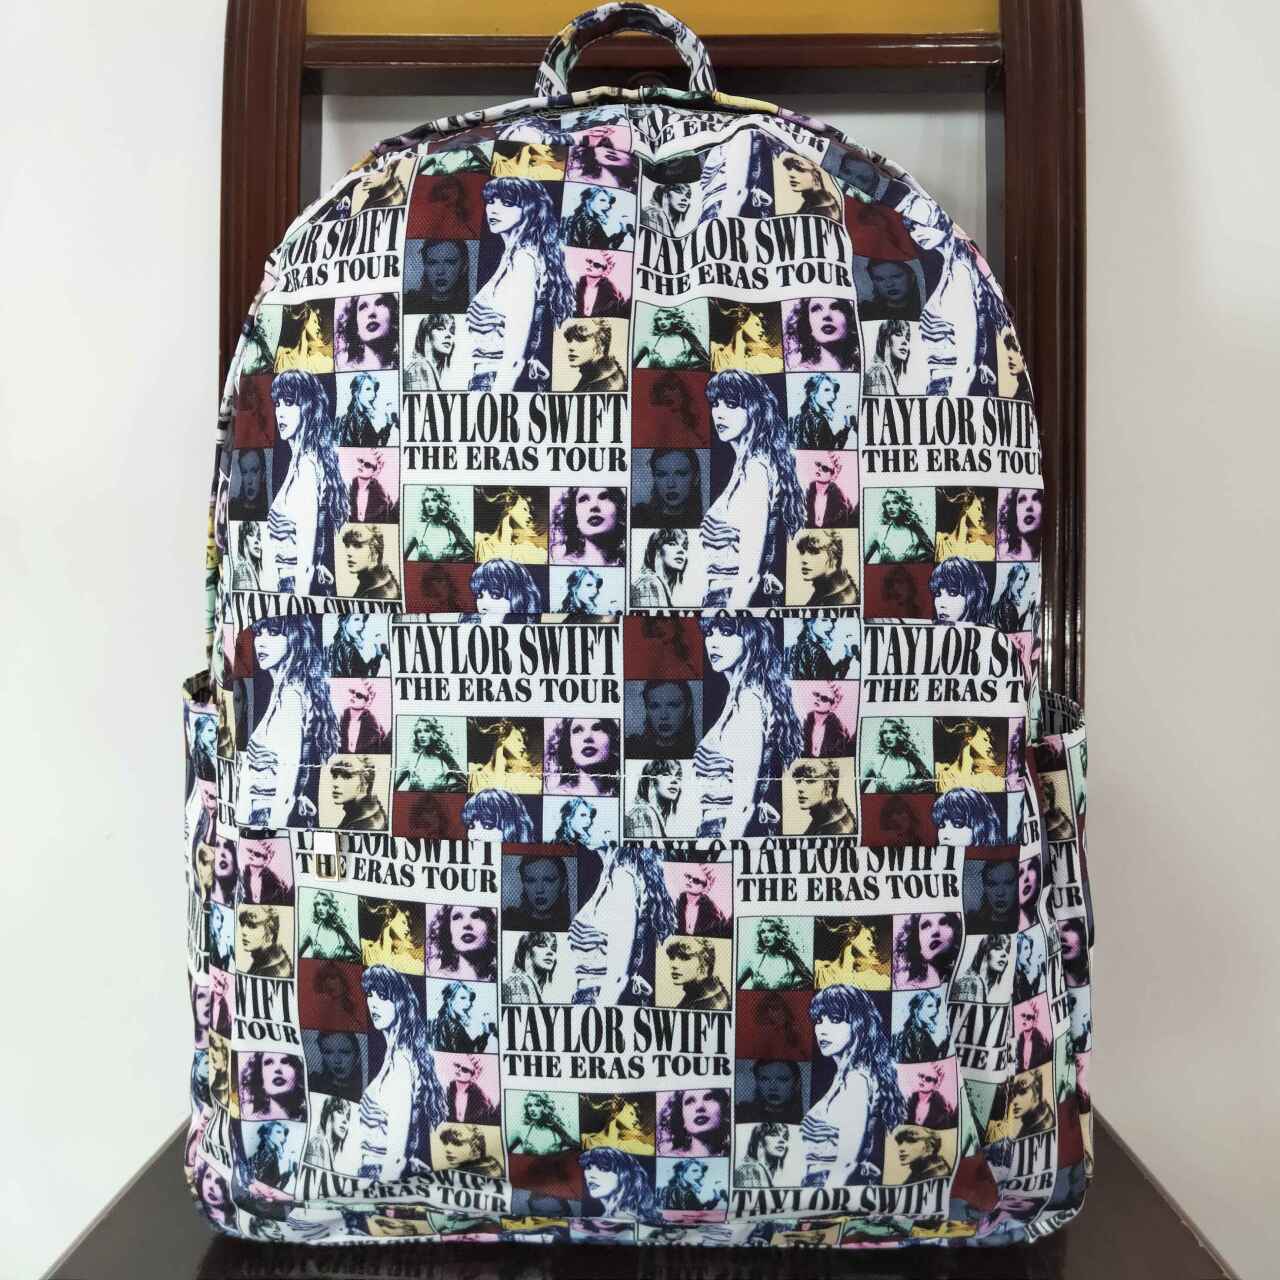 country music singer mini backpack